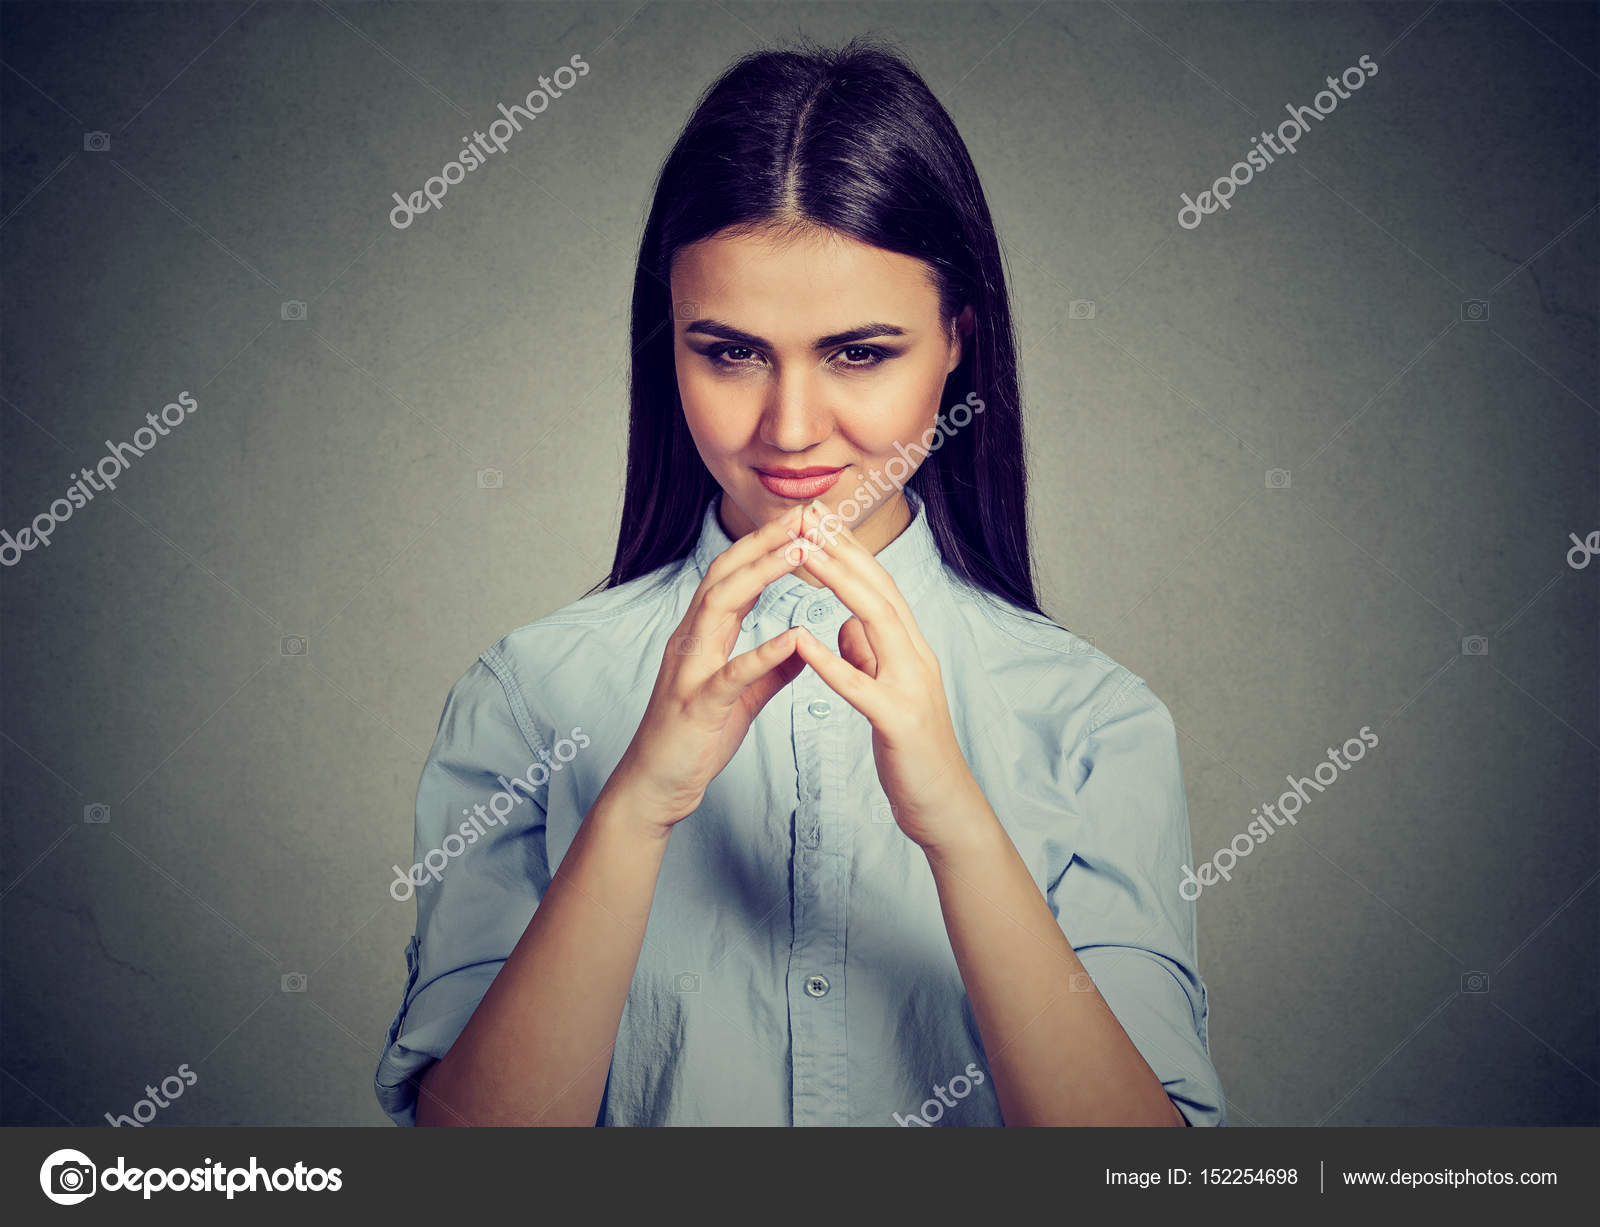 Let me think. Attractive woman looking with sly expression, having ...